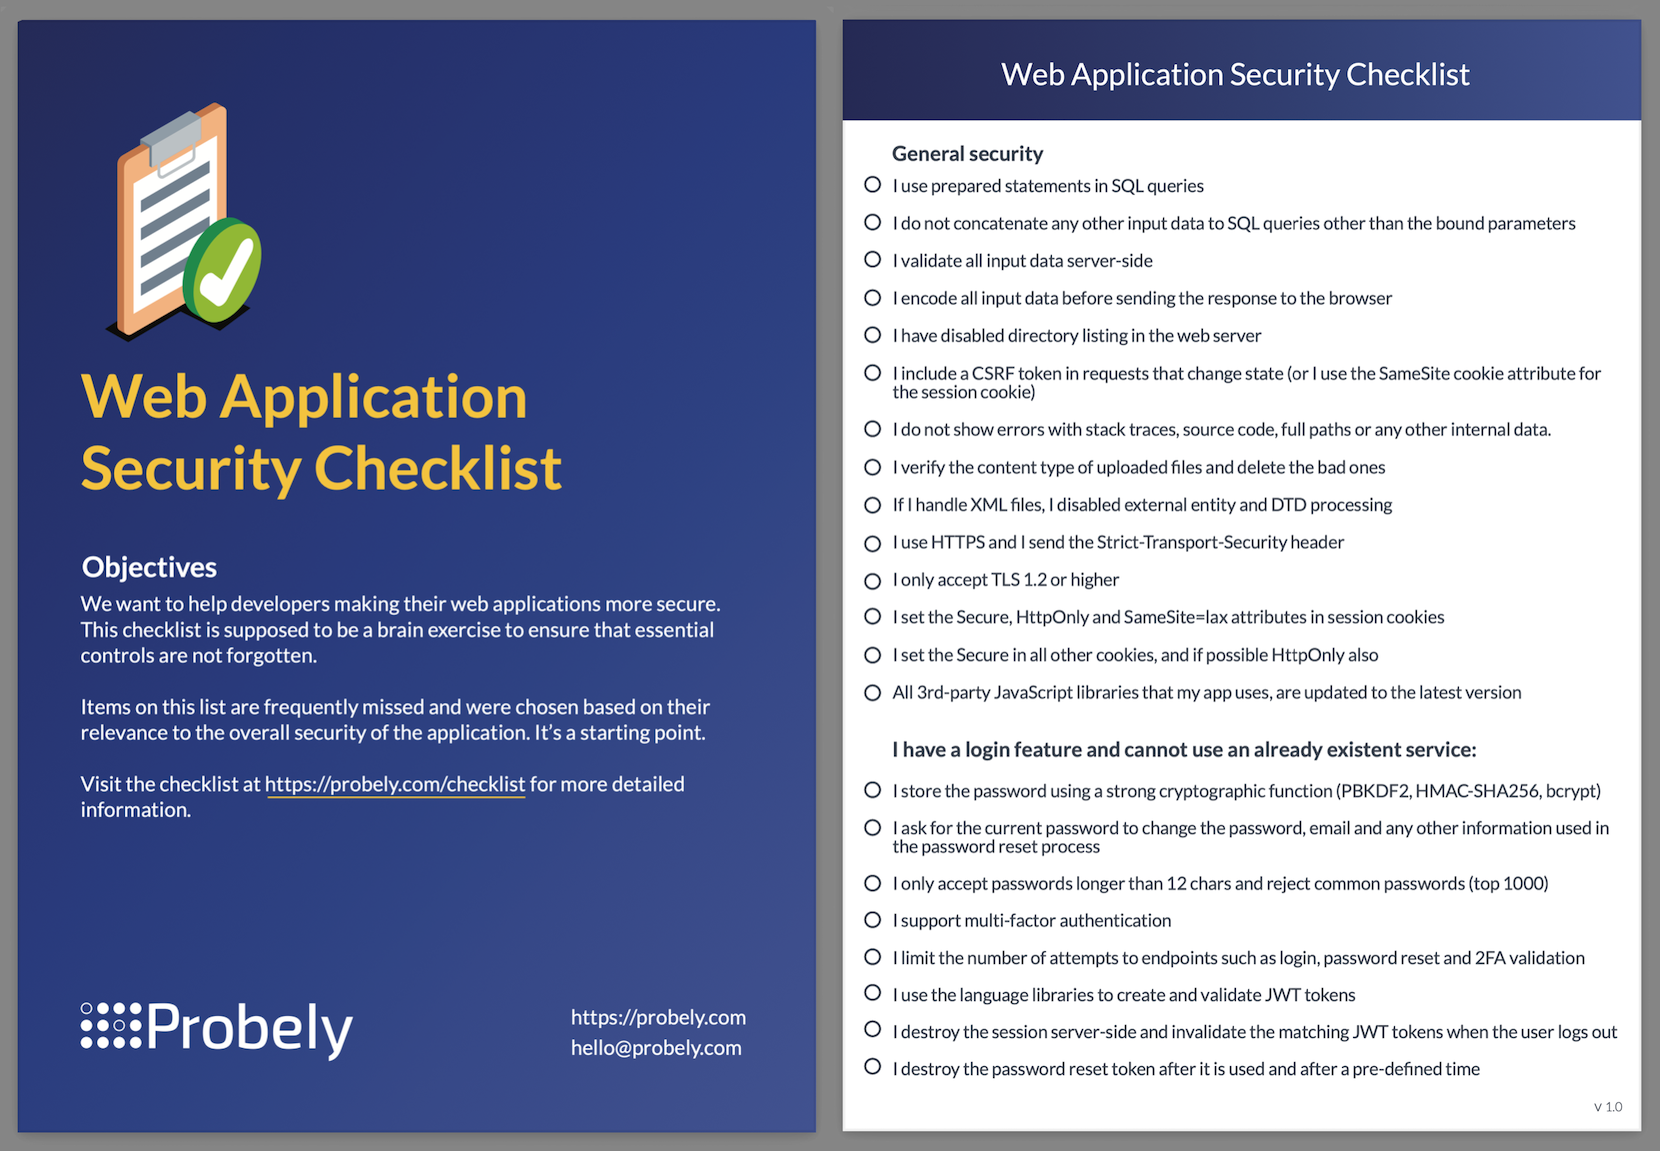 The Probely Web Application Security Checklist for Developers